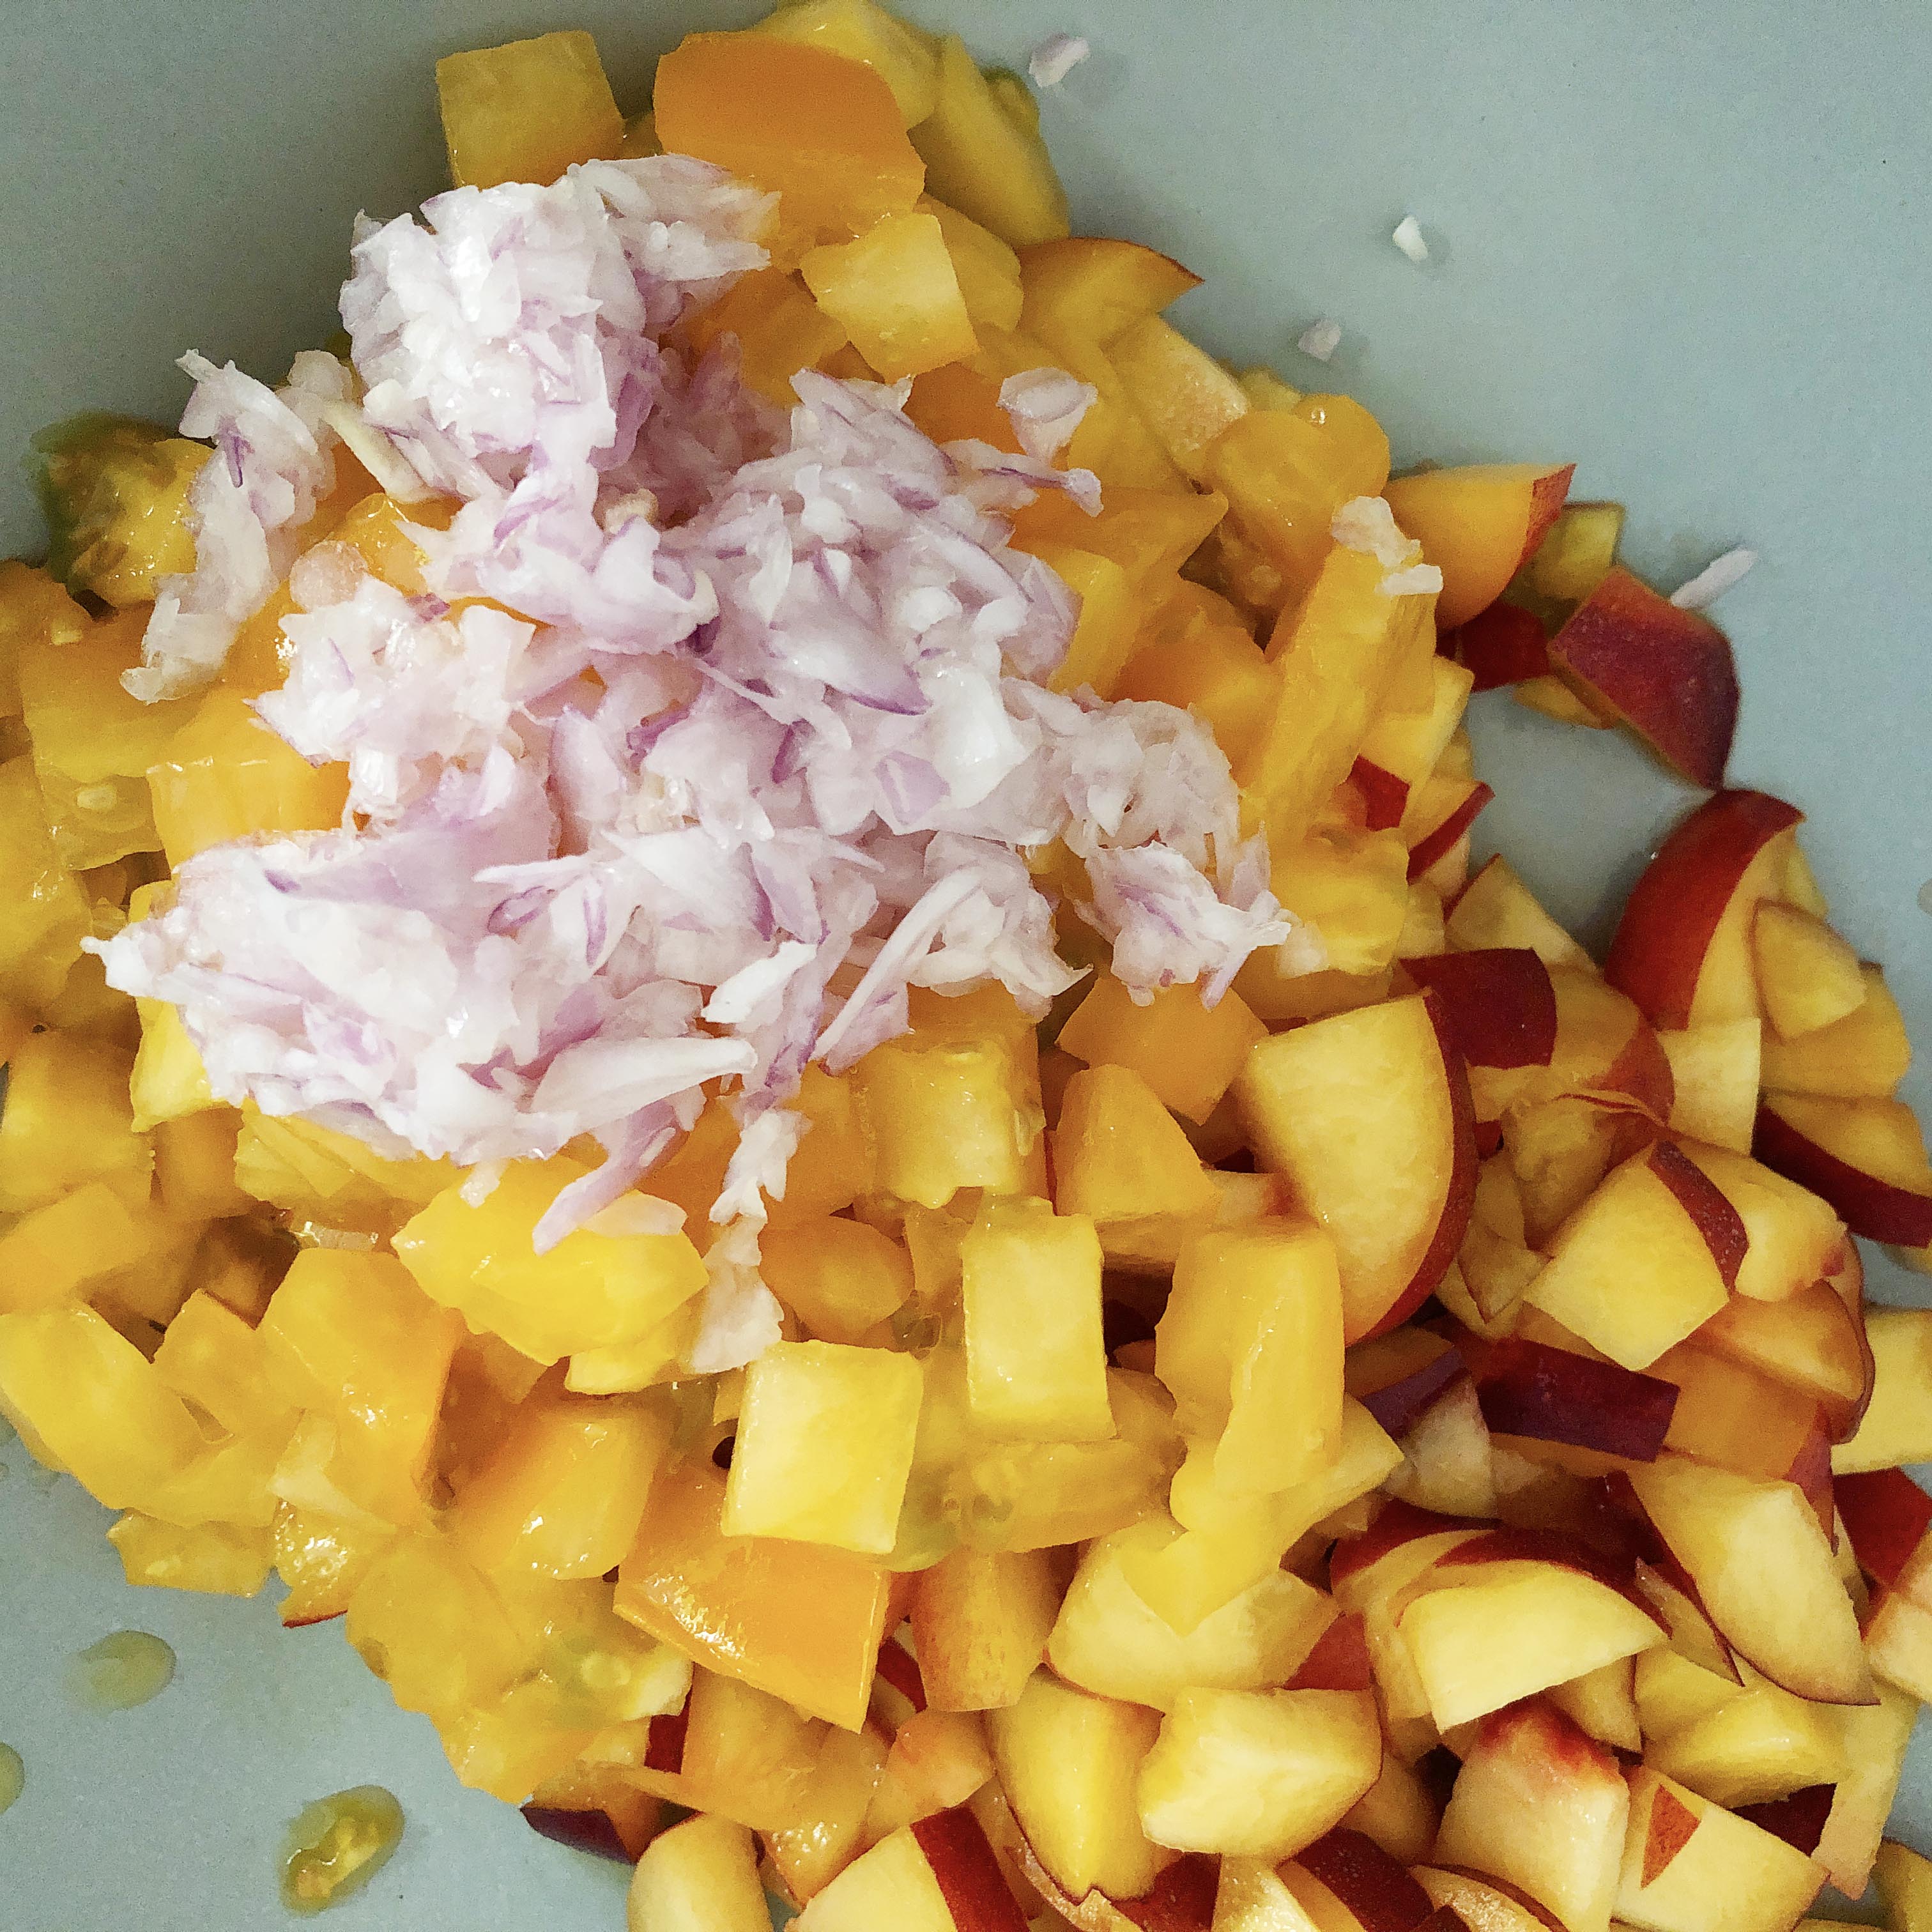 Diced shallots added to nectarines and tomatoes. Making nectarine salsa.